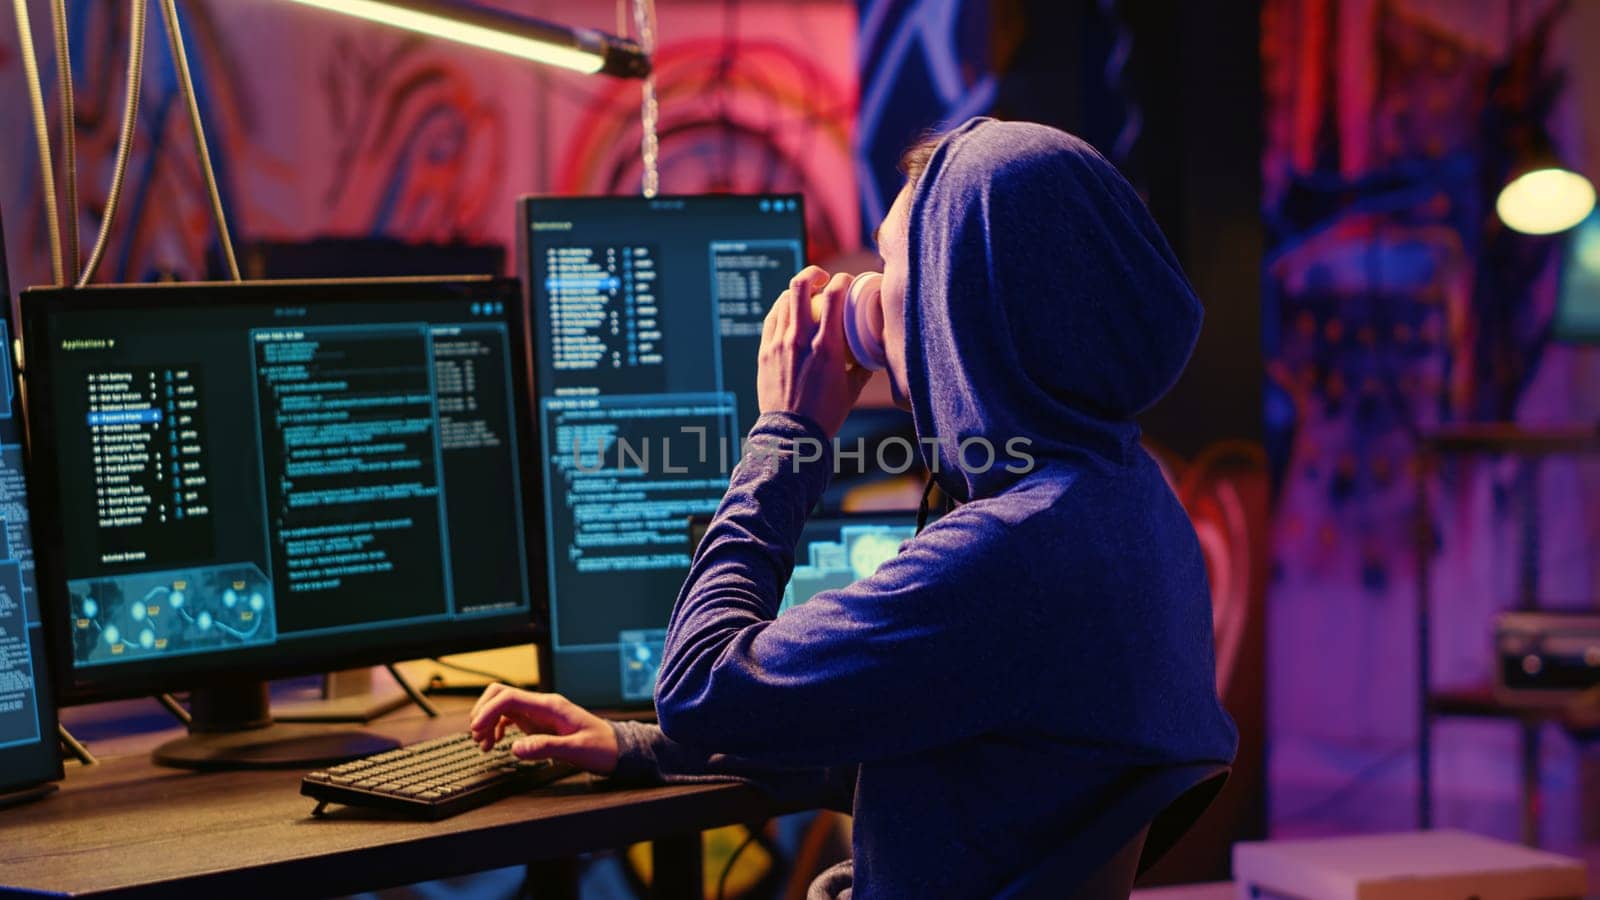 Hacker drinking coffee at underground bunker desk while using network vulnerabilities to exploit servers, trying to break computer systems at night. Lone wolf cybercriminal breaching networks